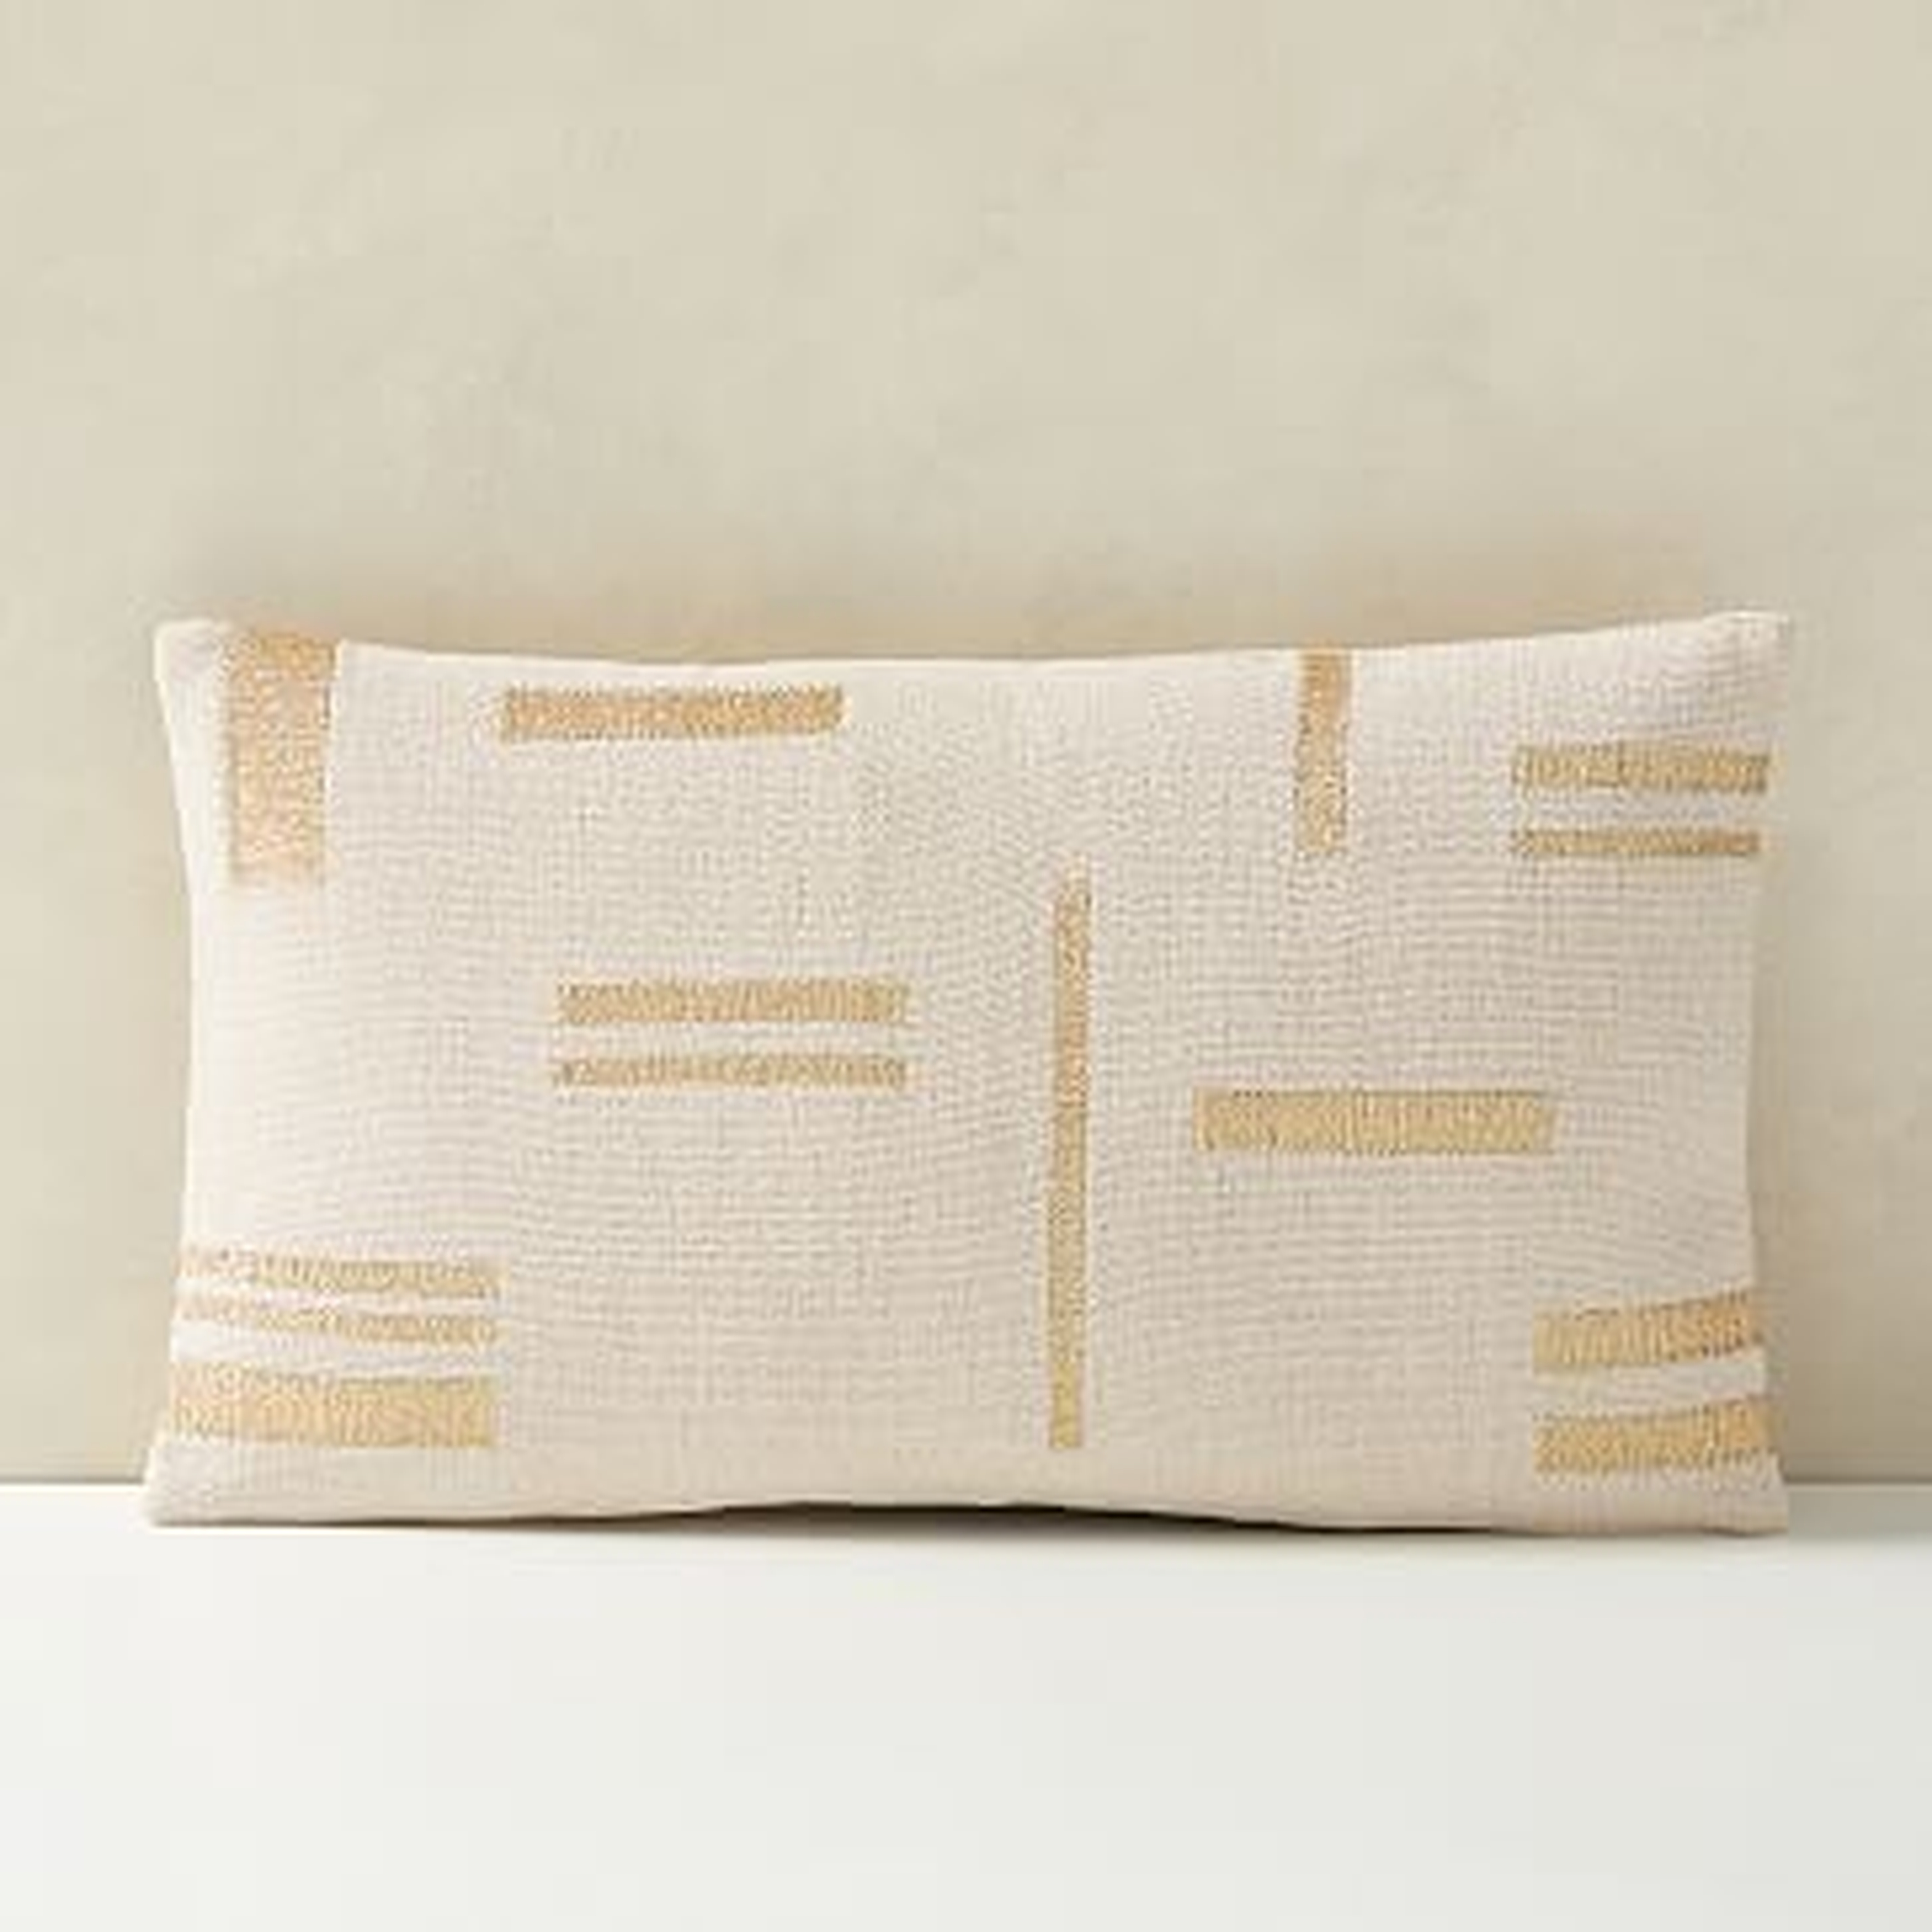 Embroidered Metallic Blocks Pillow Cover, 12"x21", Belgian Flax - West Elm